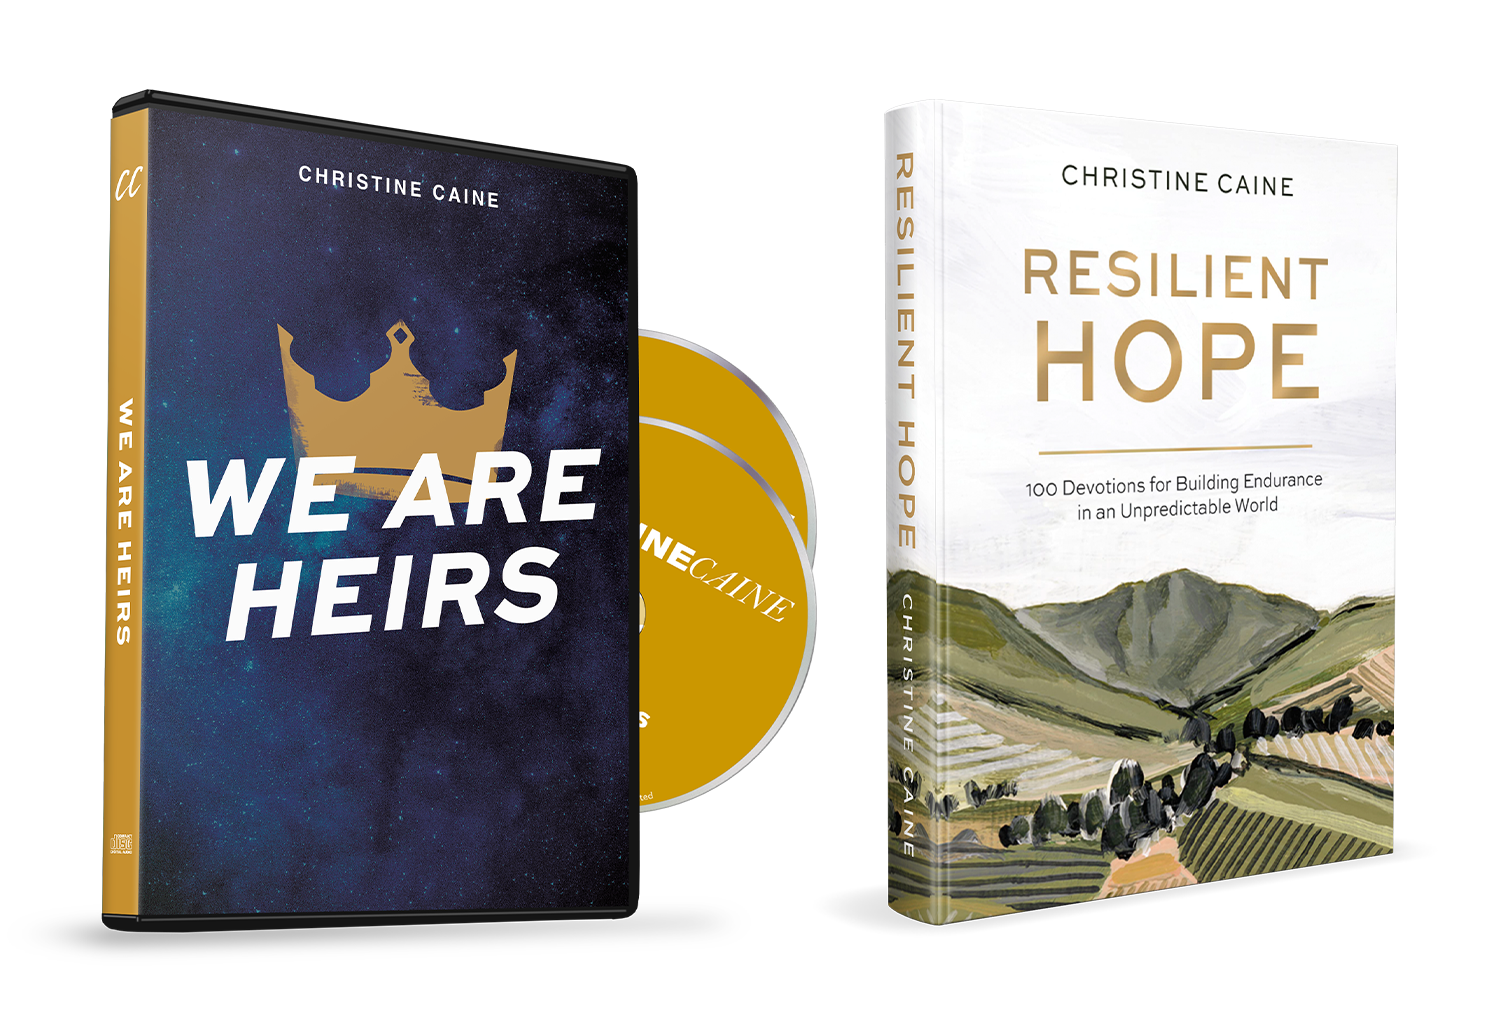 We Are Heirs and Resilient Hope by Christine Caine on TBN